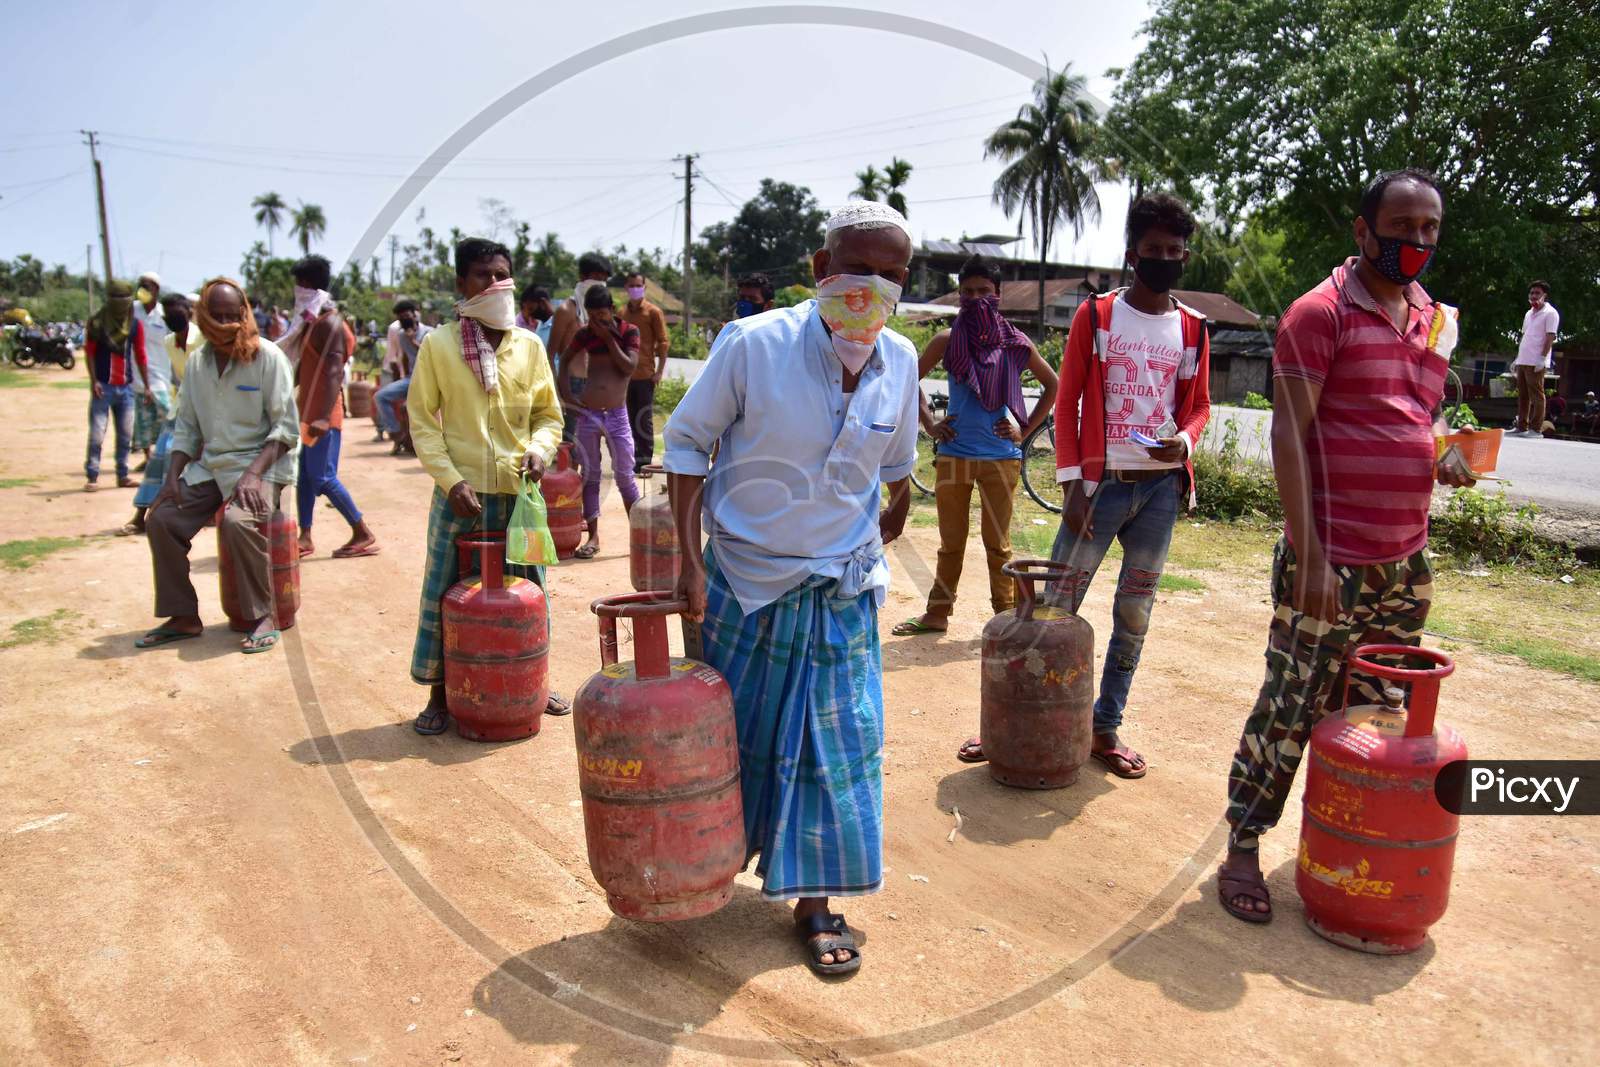 People Maintain Social Distance As They Wait In A Queue  To Collect  Lpg Gas Cylinder  During A Nationwide Lockdown In The Wake Of Coronavirus (COVID-19)  Pandemic, At Samaguri In Nagaon District Of Assam On  Tuesday, April 21, 2020